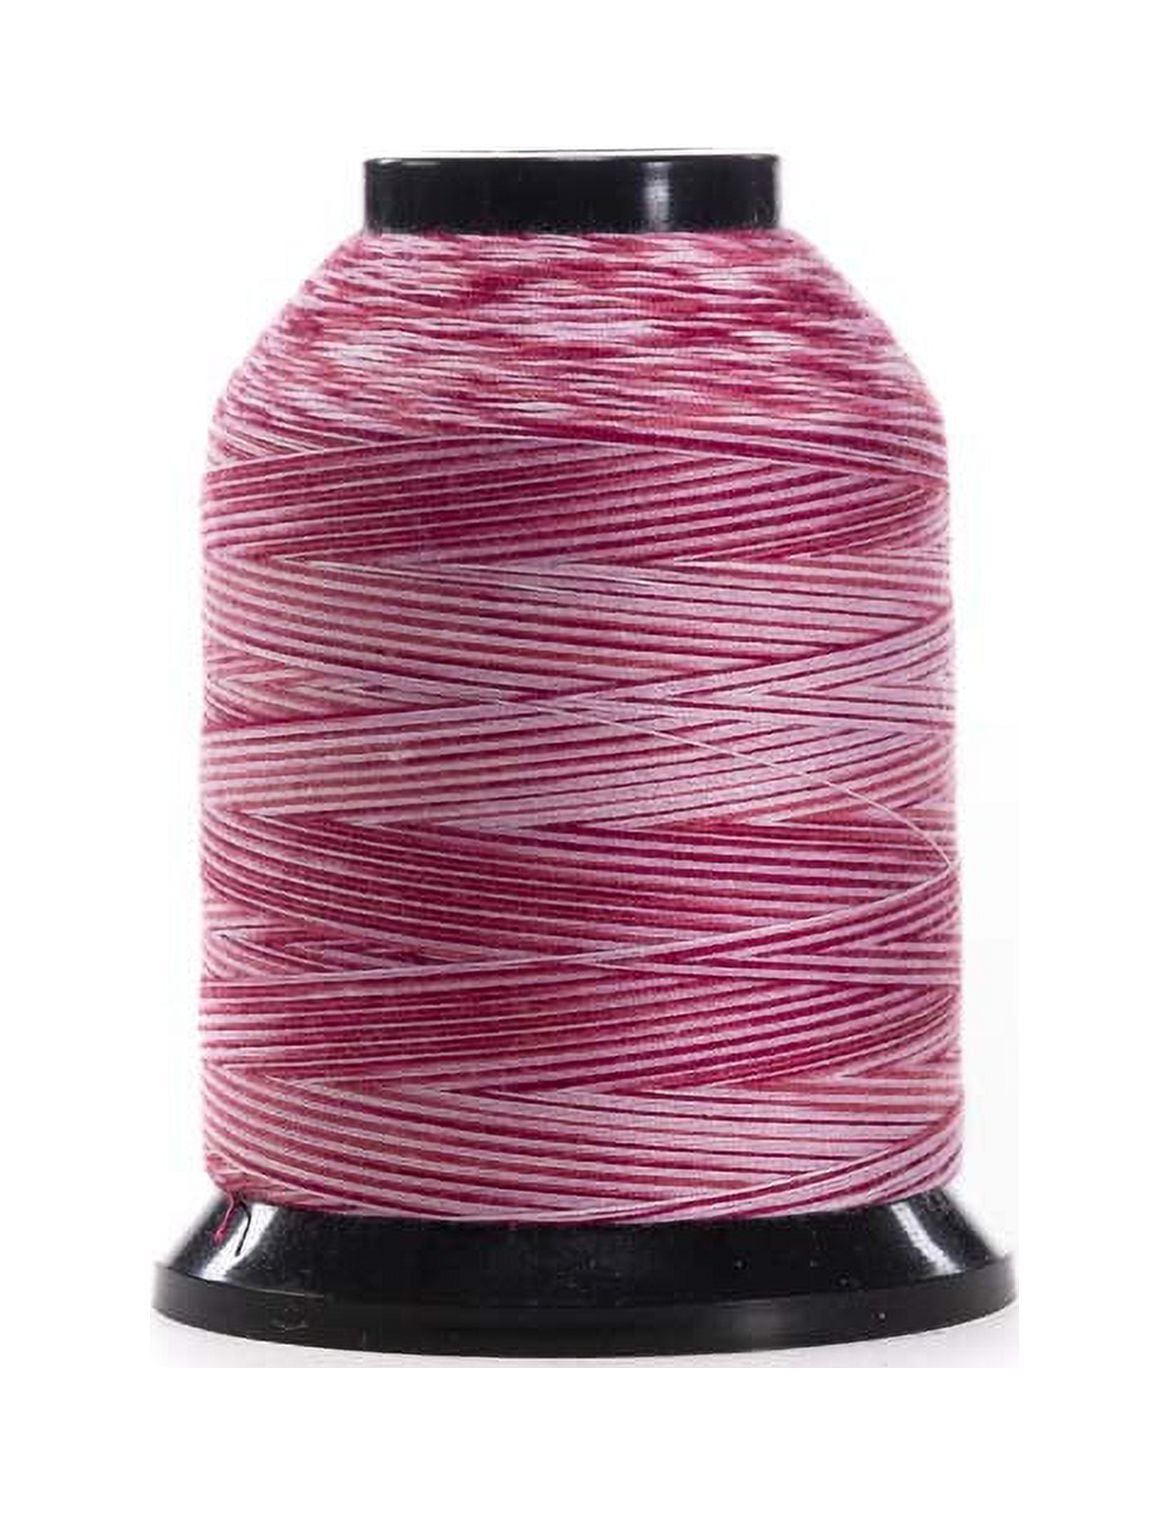 Wholesale Polyester Sewing Embroidery Thread glide 5 Eco-friendly cheap  Black & White